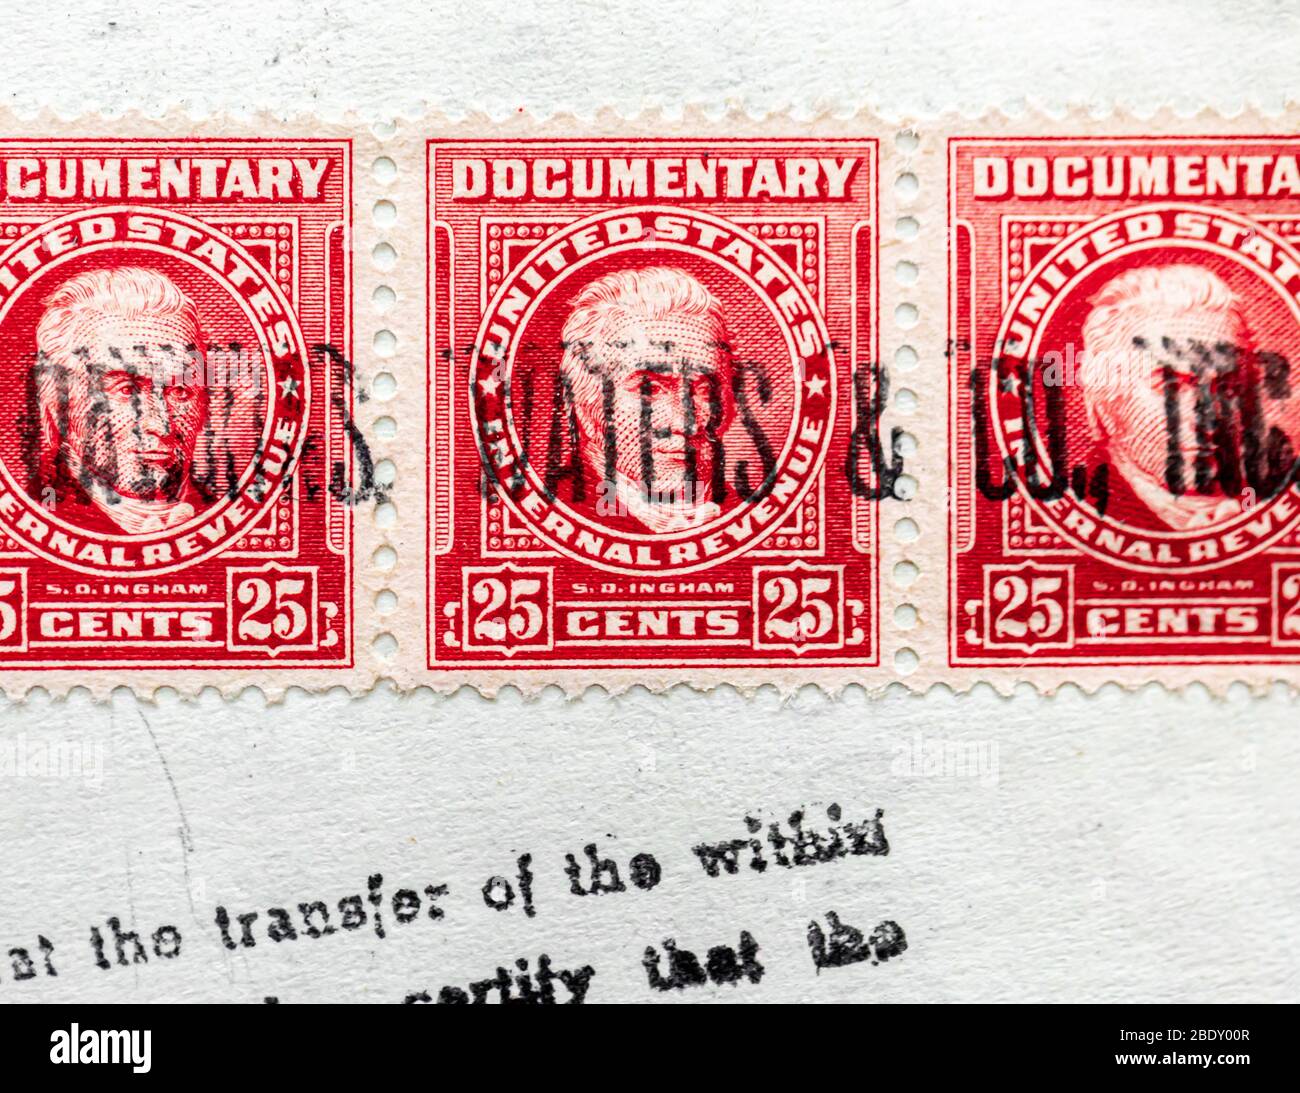 Closeup of old documentary stamps Stock Photo